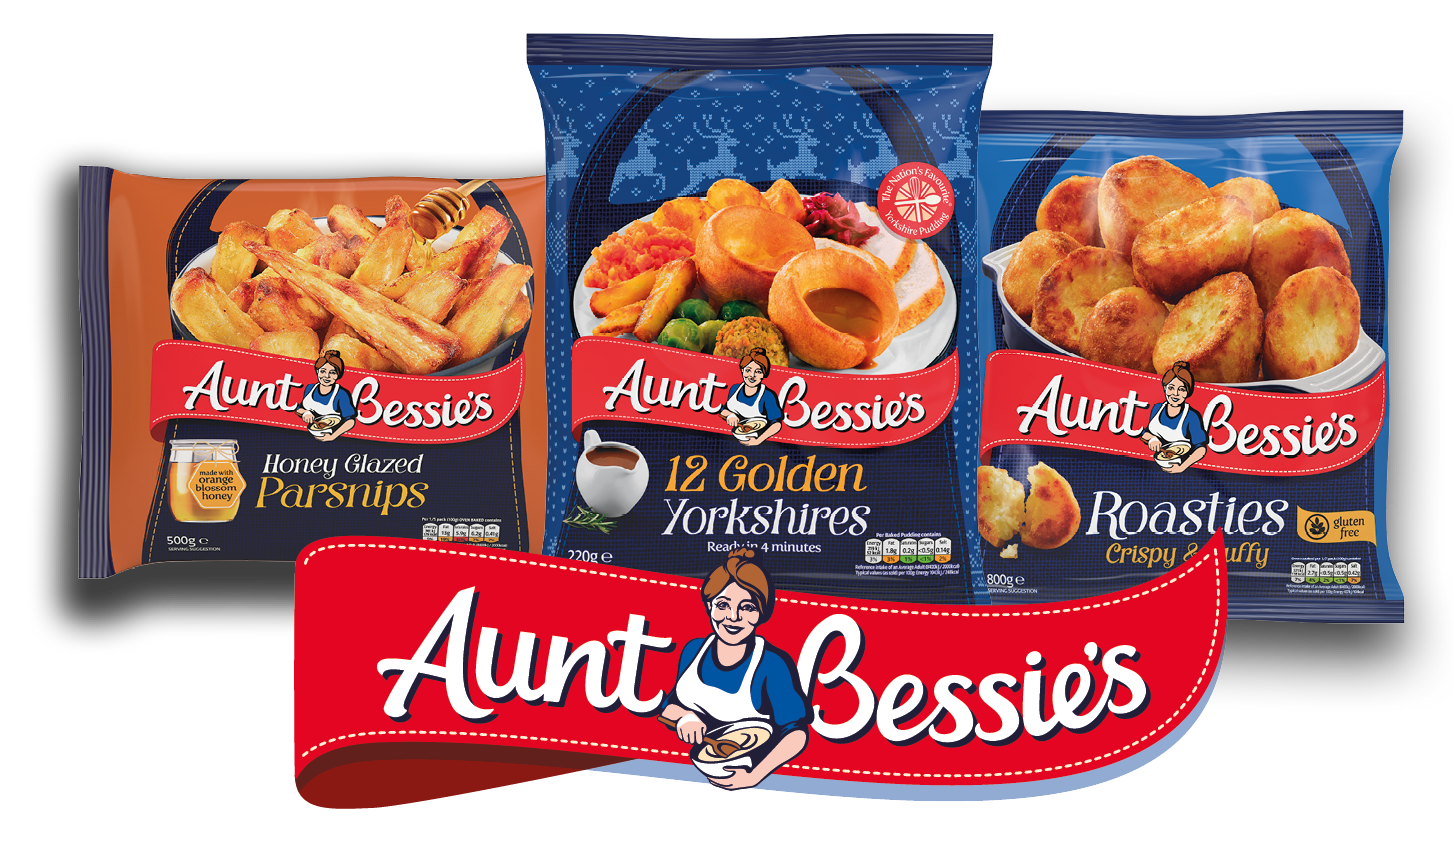 Aunt Bessie's Chitterlings on Sale at Food Lion - wide 8